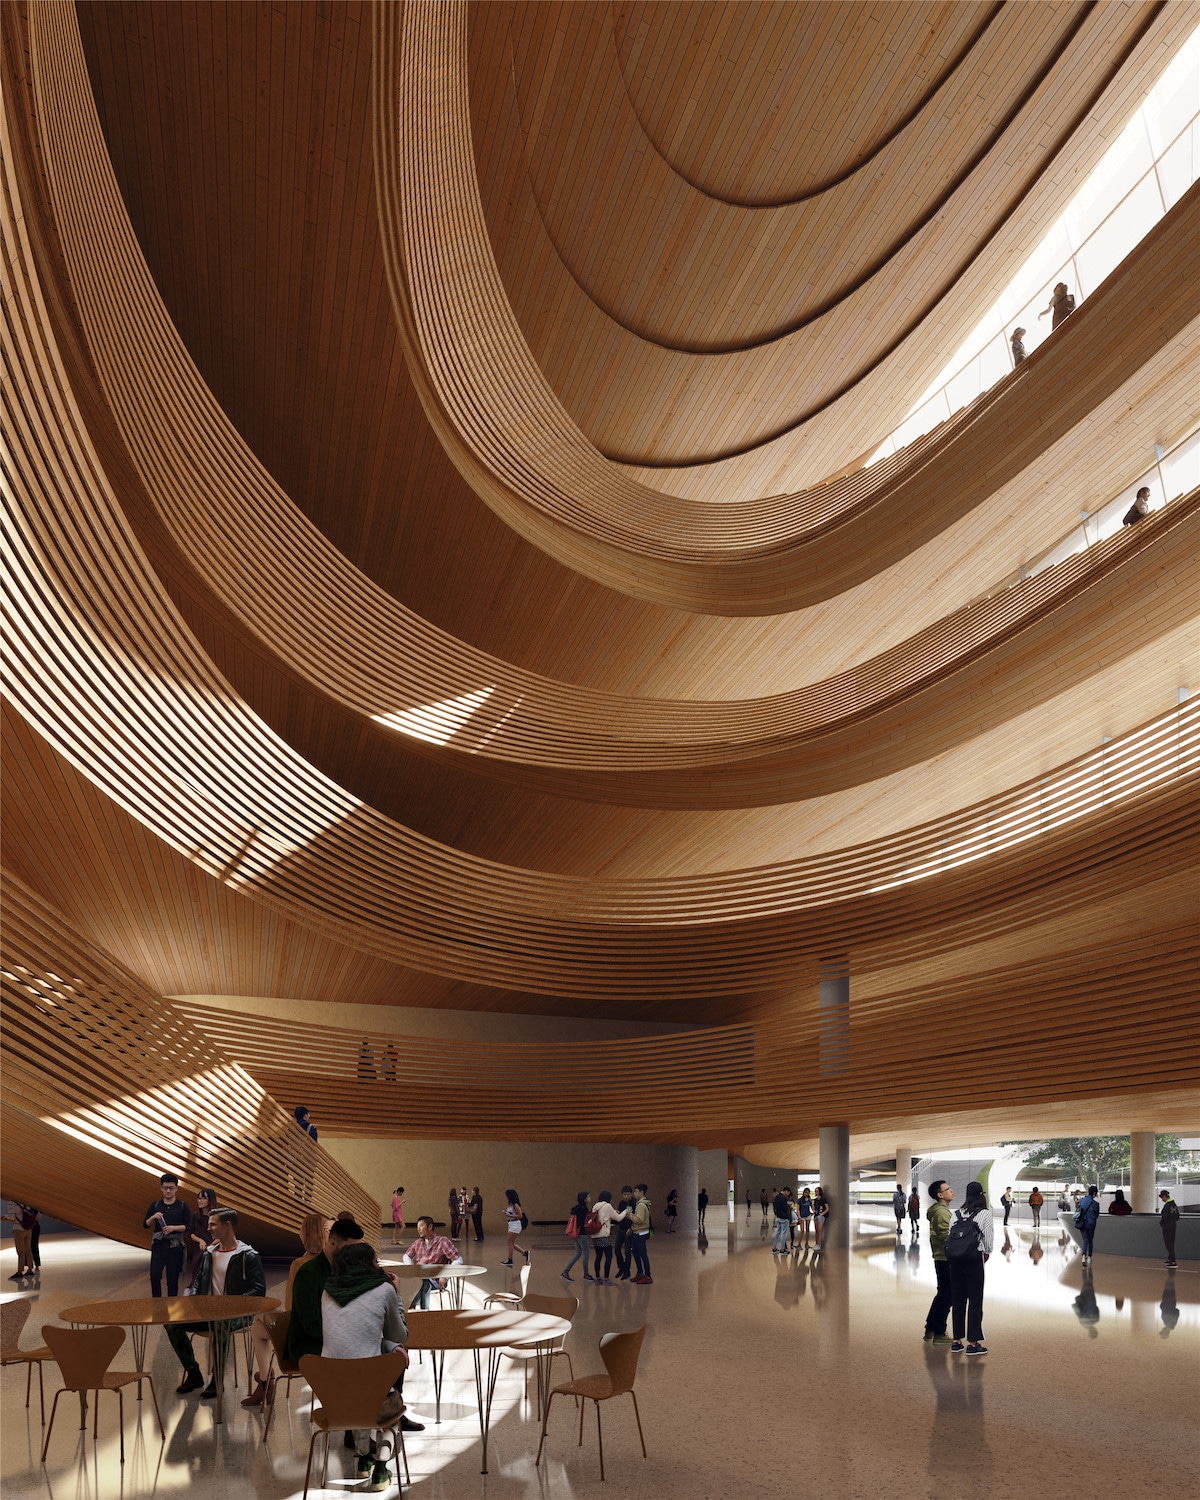 Interior View of MAD Architects' Jiaxing Civic Center